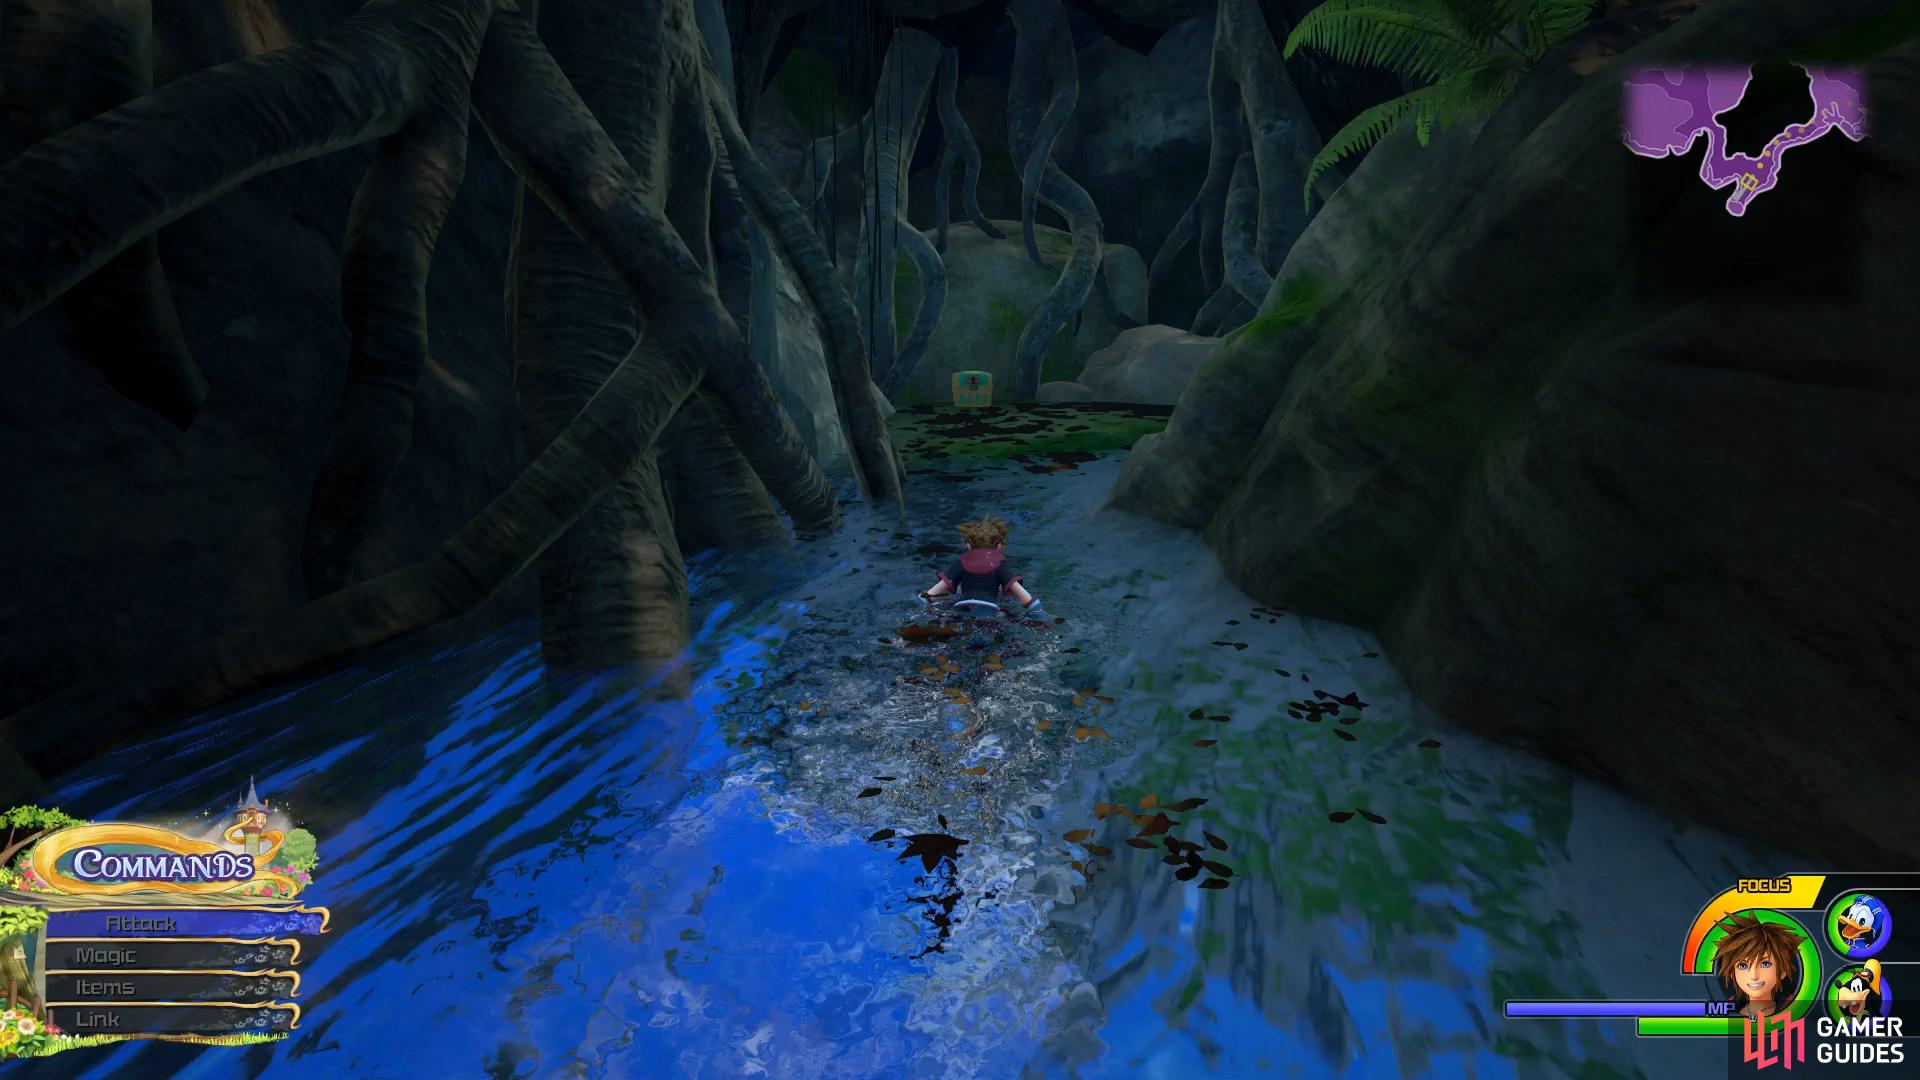 take the western path through the water to discover this chest.